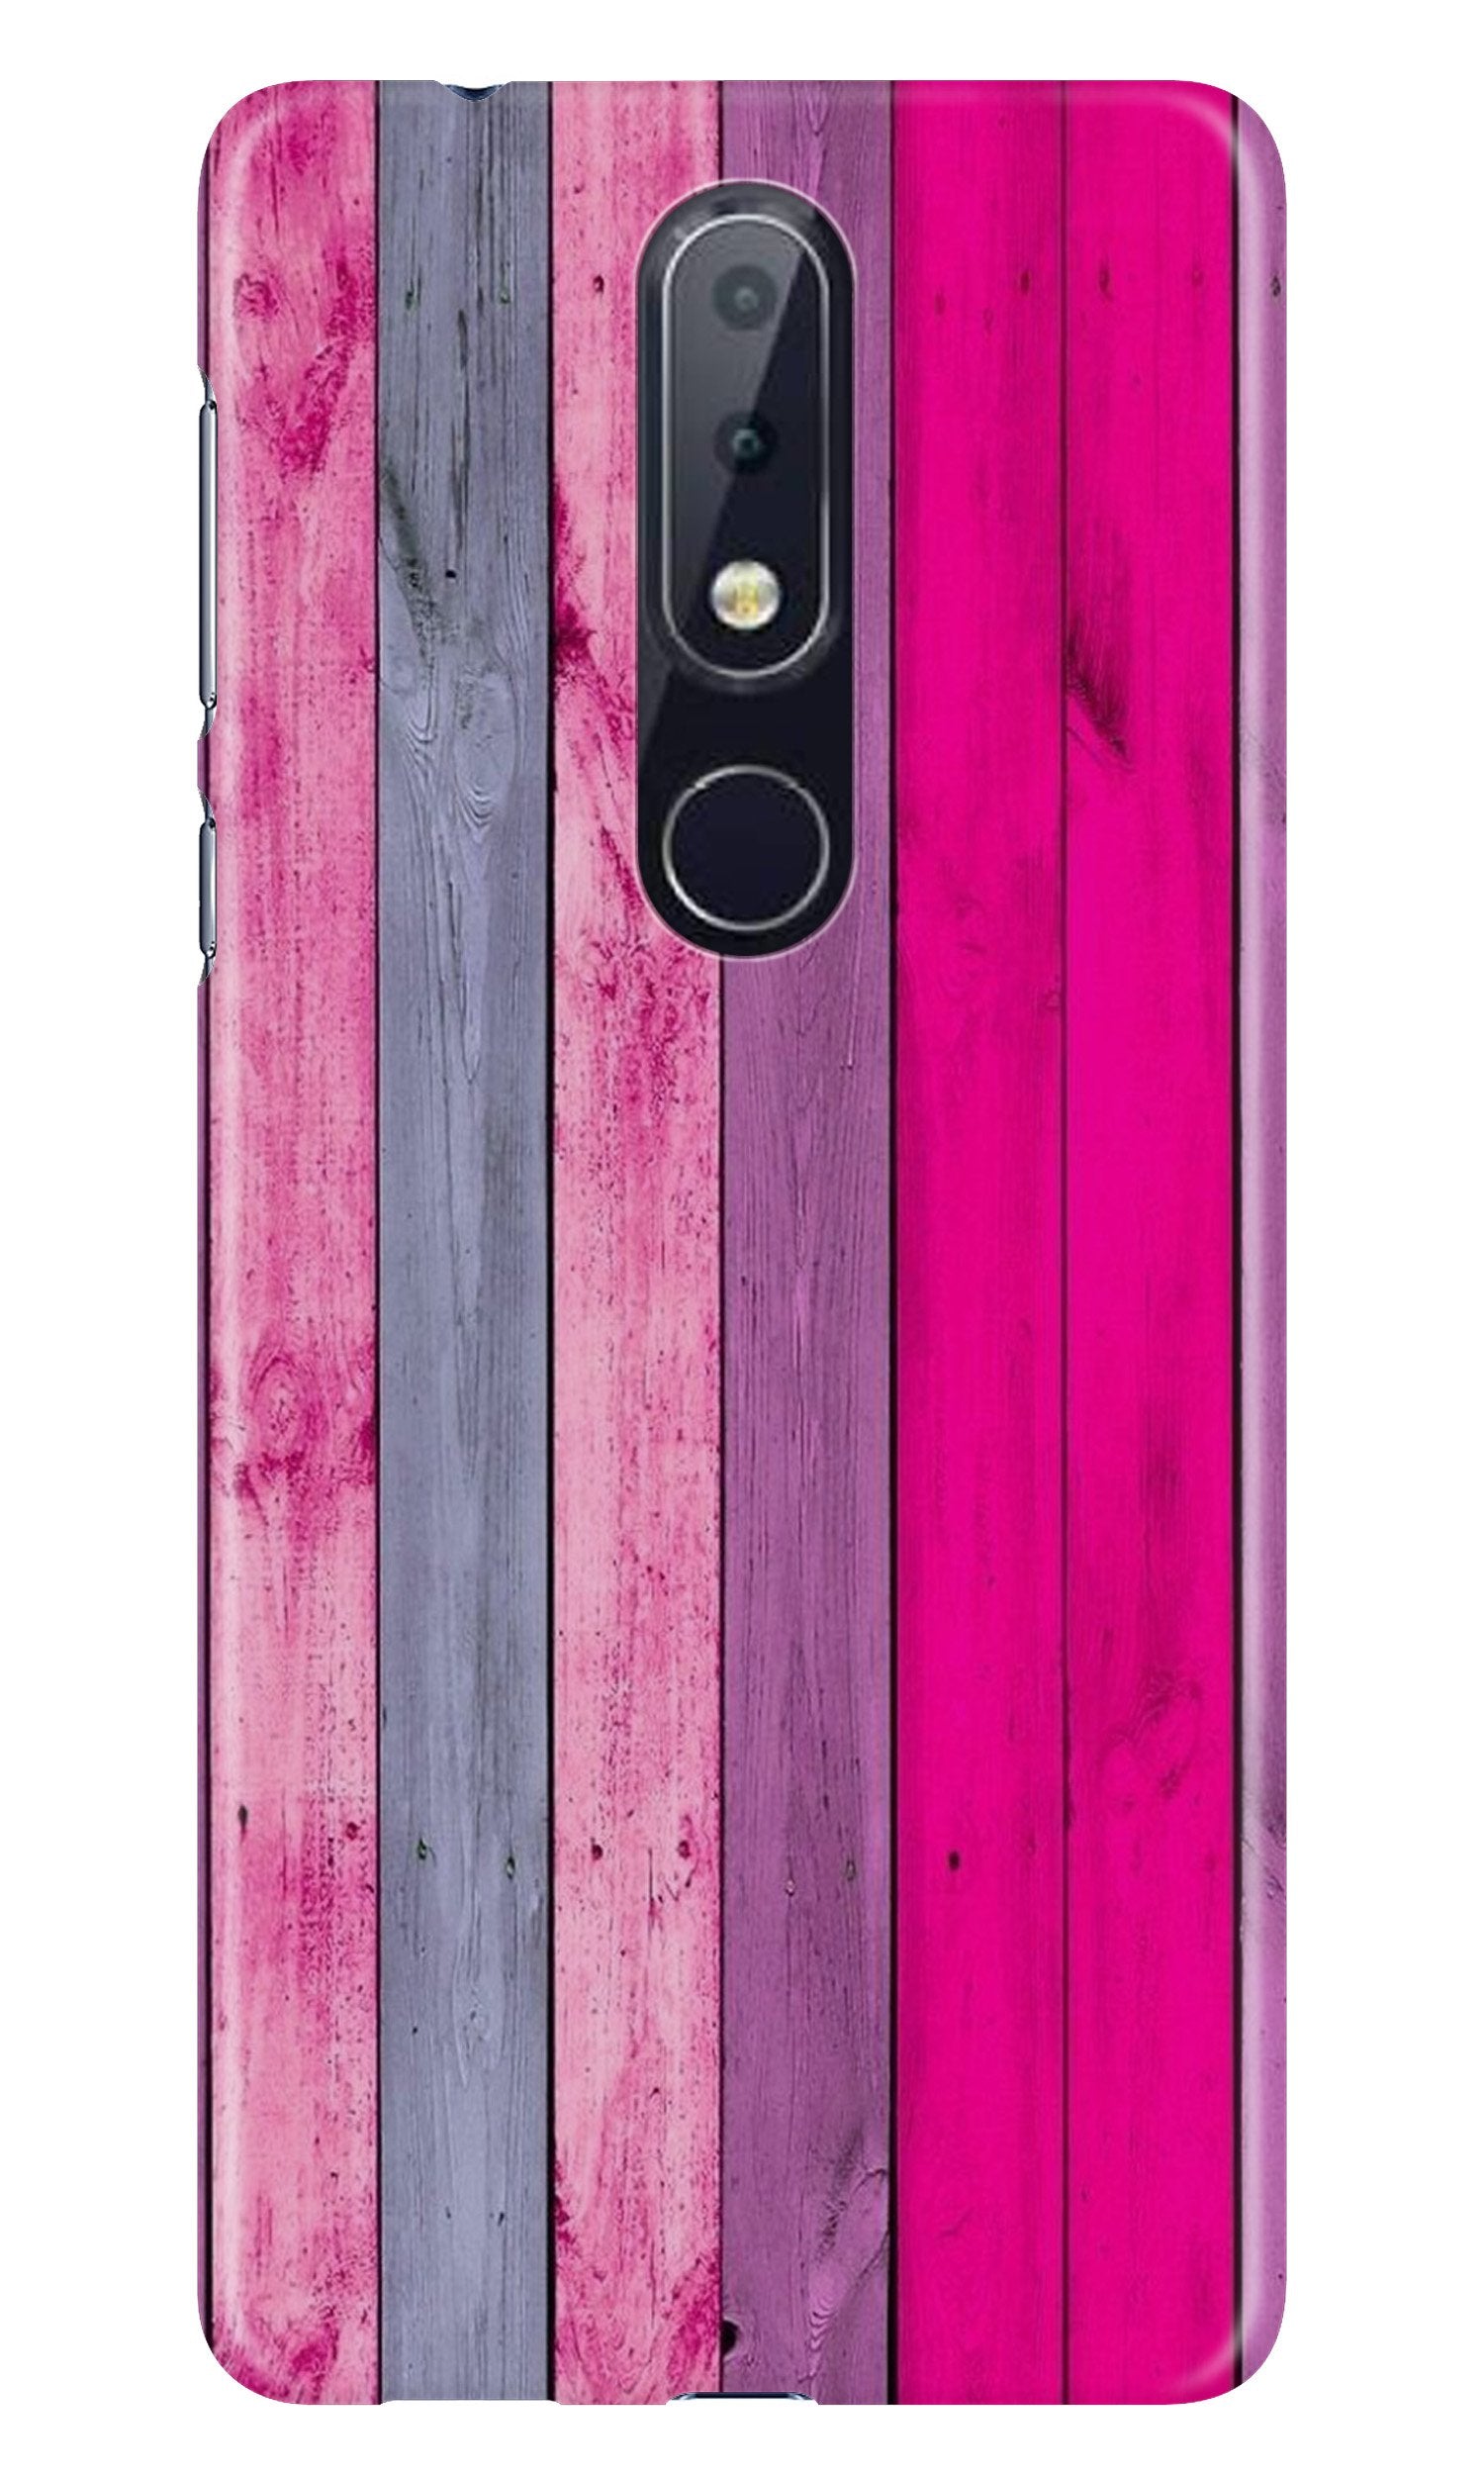 Wooden look Case for Nokia 7.1